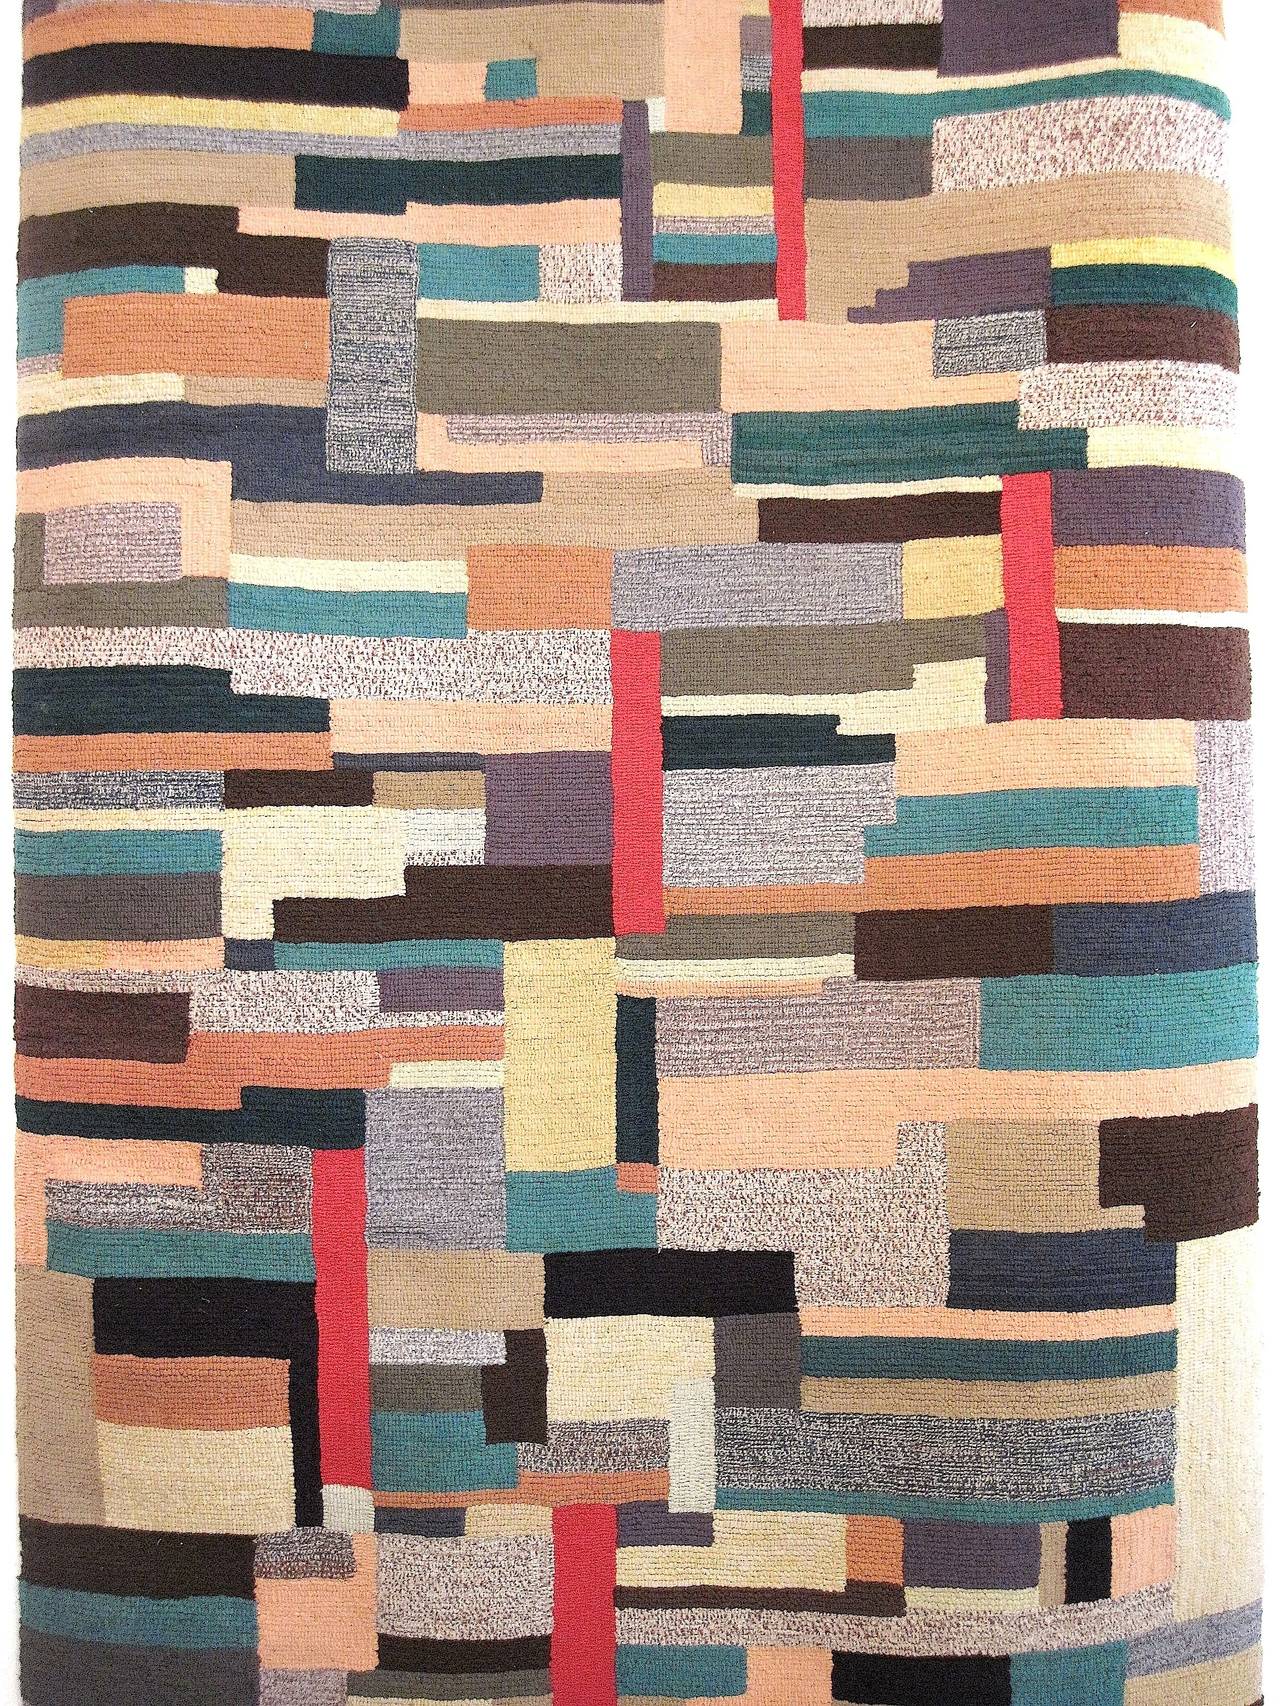 Truly beautiful and unique hand-hooked American rug in a runner format, with both colors and graphics that contribute to its strong Mid-Century Modern look and appeal. Unusual for hooked rugs, this piece is signed 'JS 1973' and in close to perfect